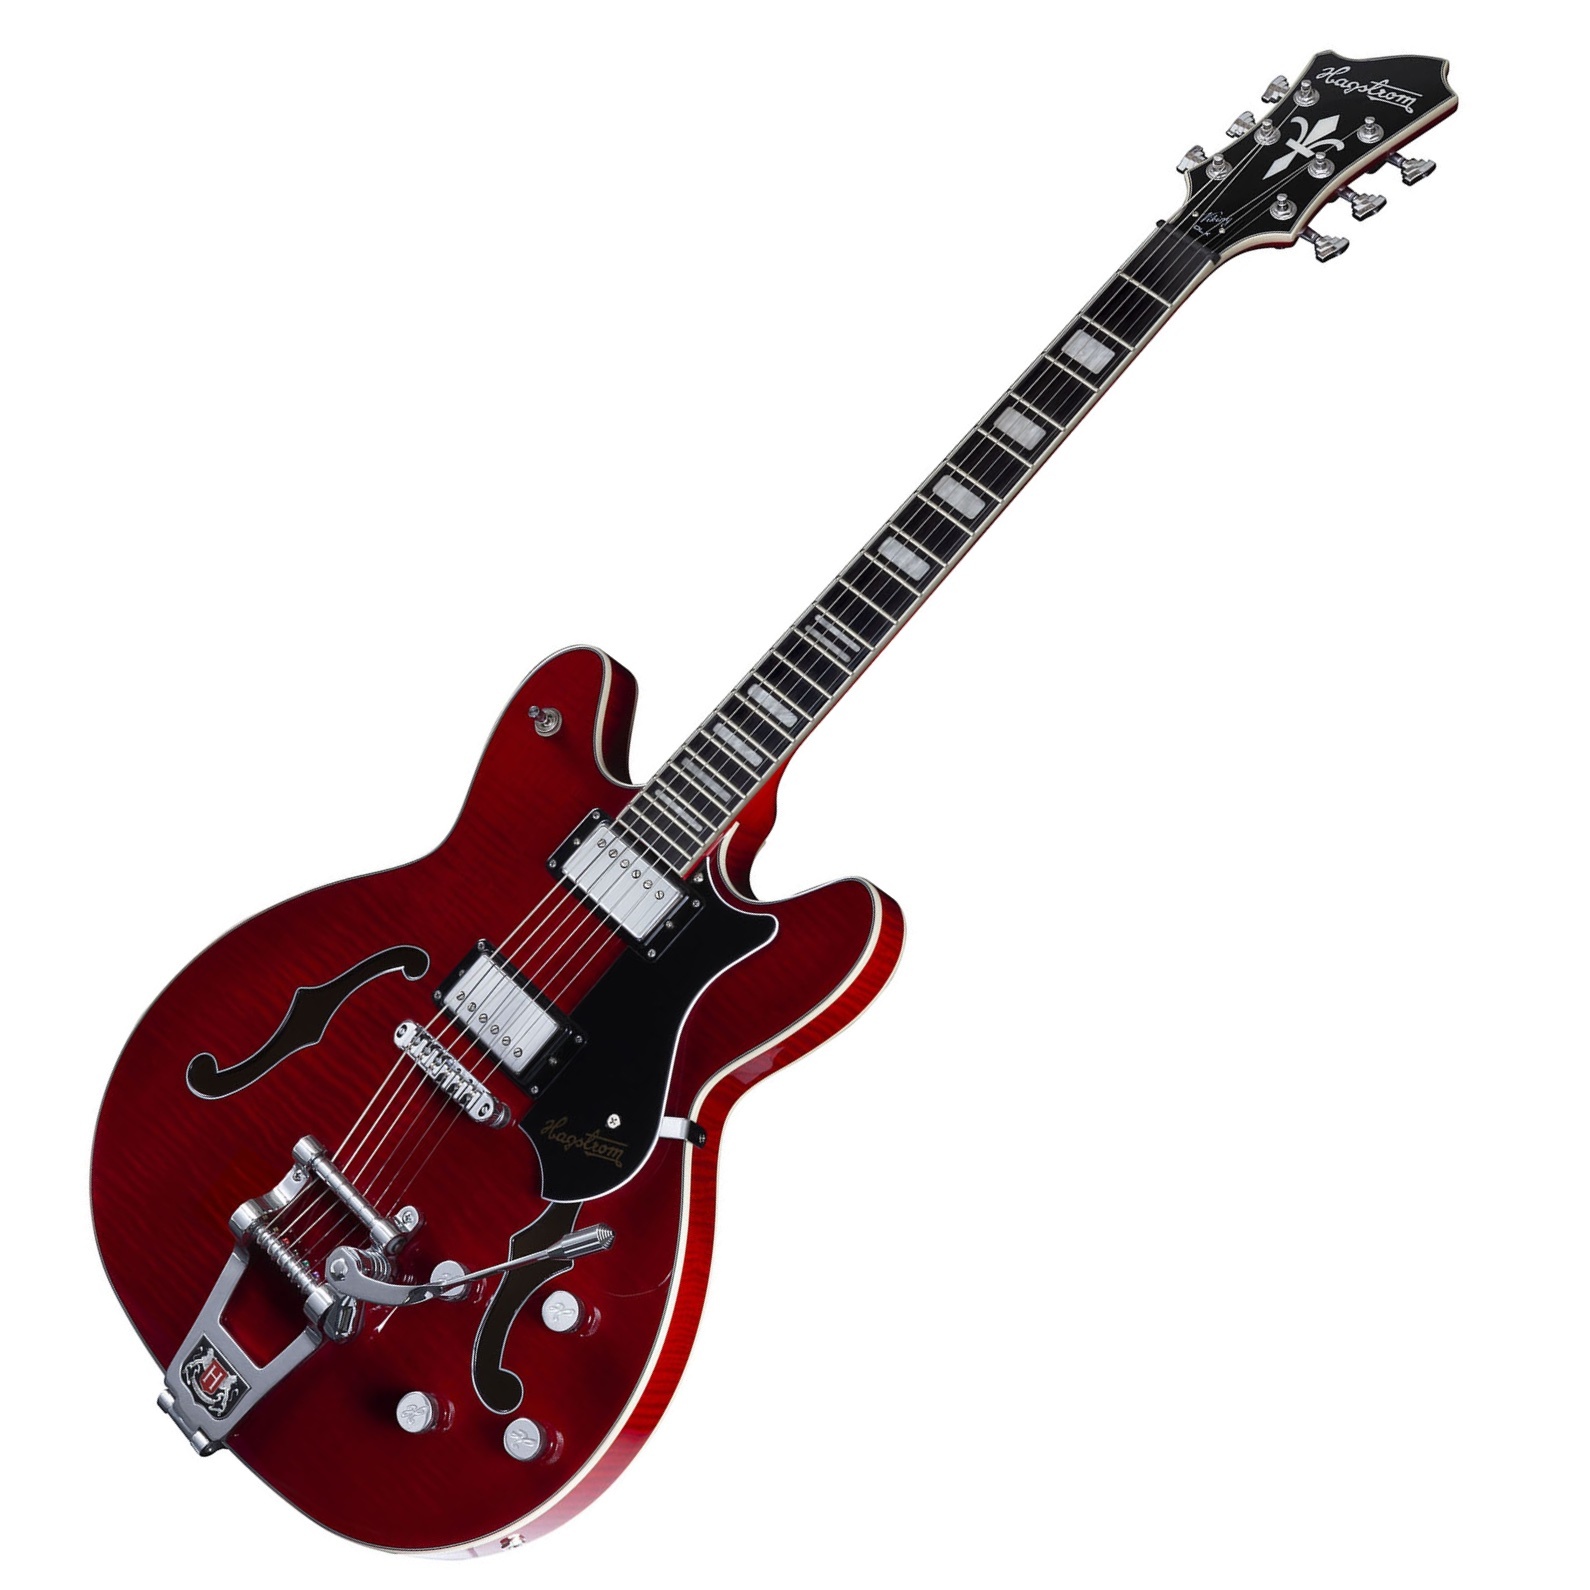 Hagstrom Tremar Viking Deluxe, Semi-hollow Electric Guitar with Tremolo, Wild Cherry Transparent Gloss